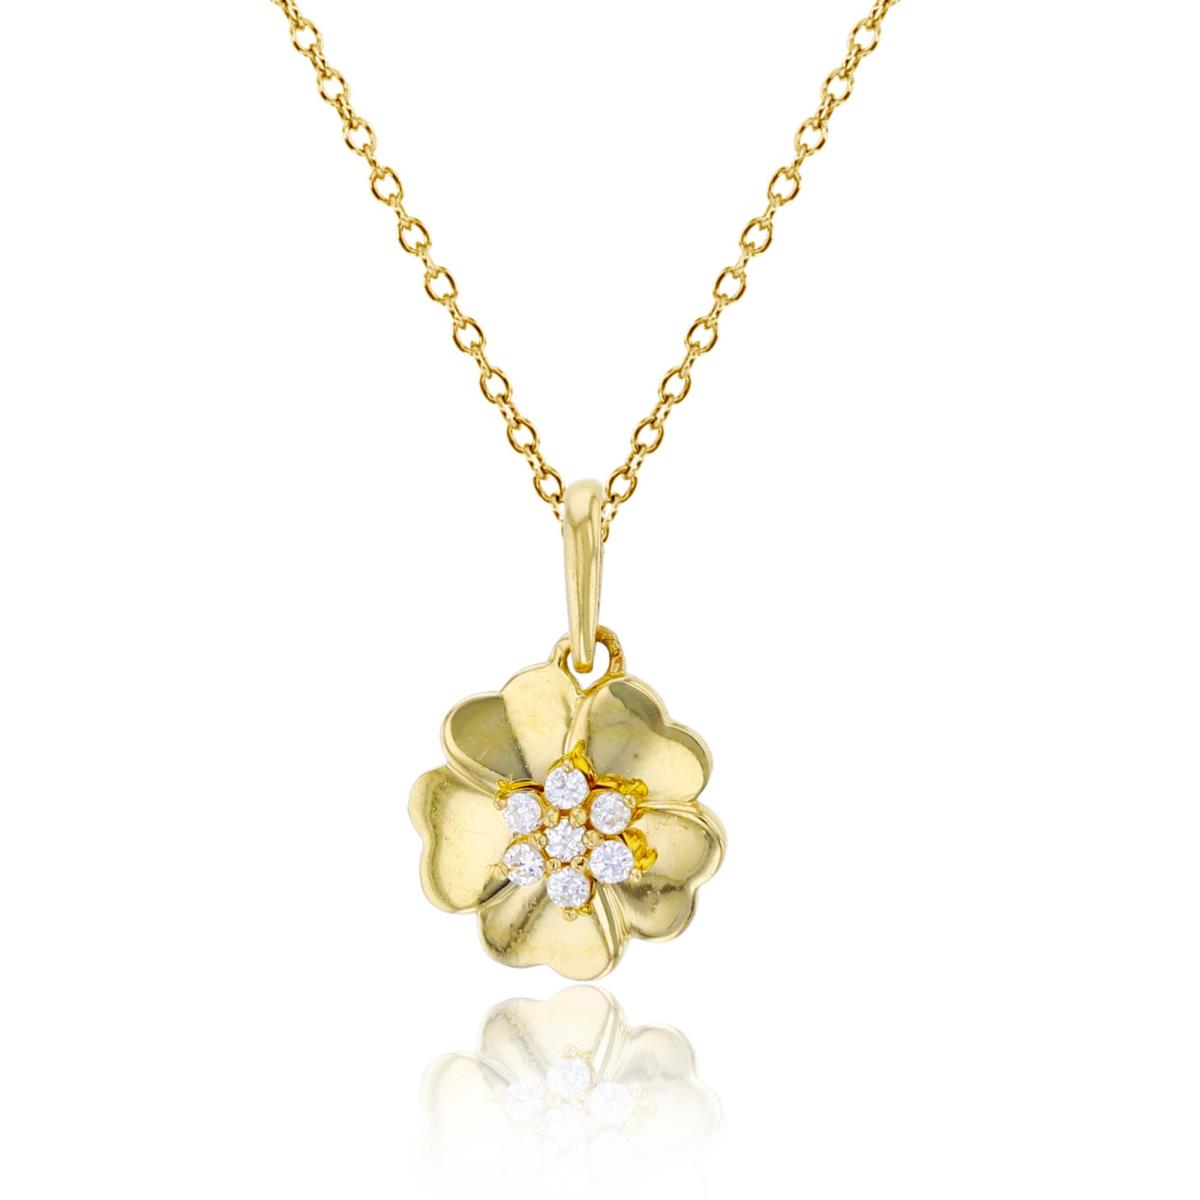 10K Yellow Gold Polished Flower with Rd Cut CZ 18" Necklace